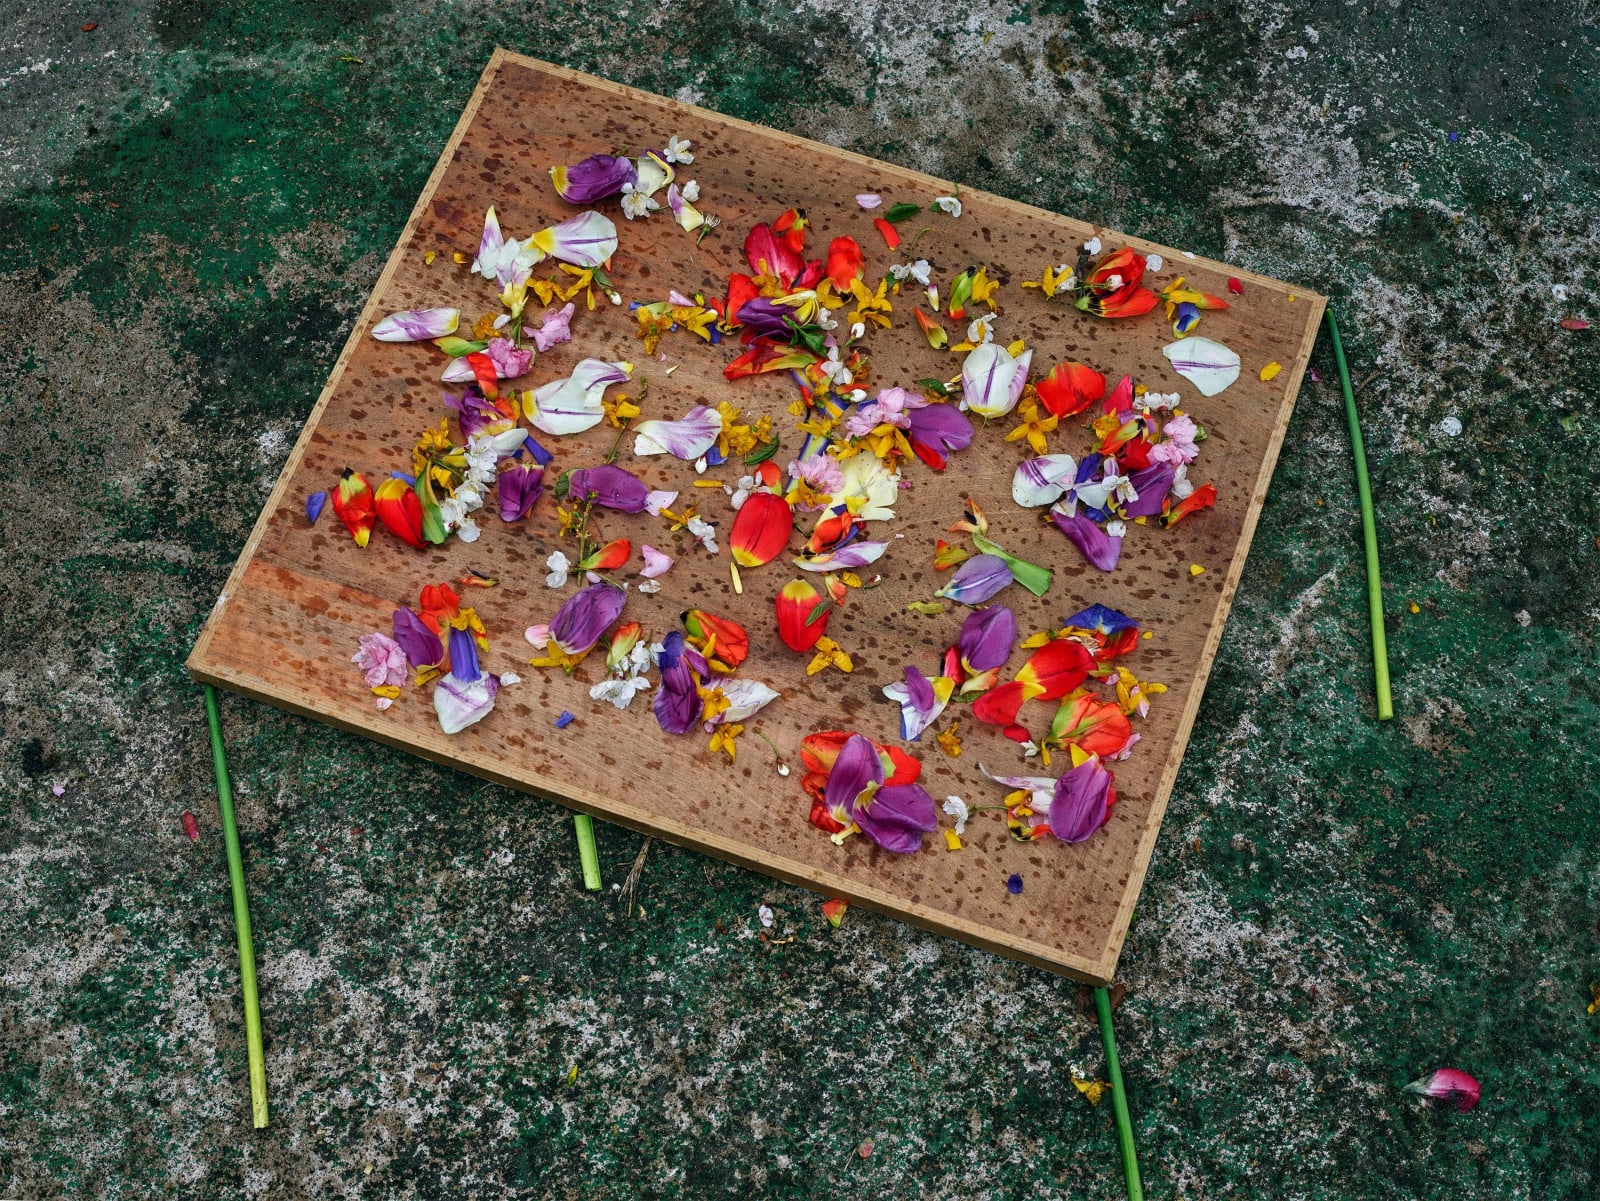 Abelardo Morell Flowers for Lisa #18 Monet's Gardens Giverny France flowers on a two dimensional illusion of a table all made of piece of wood and stems